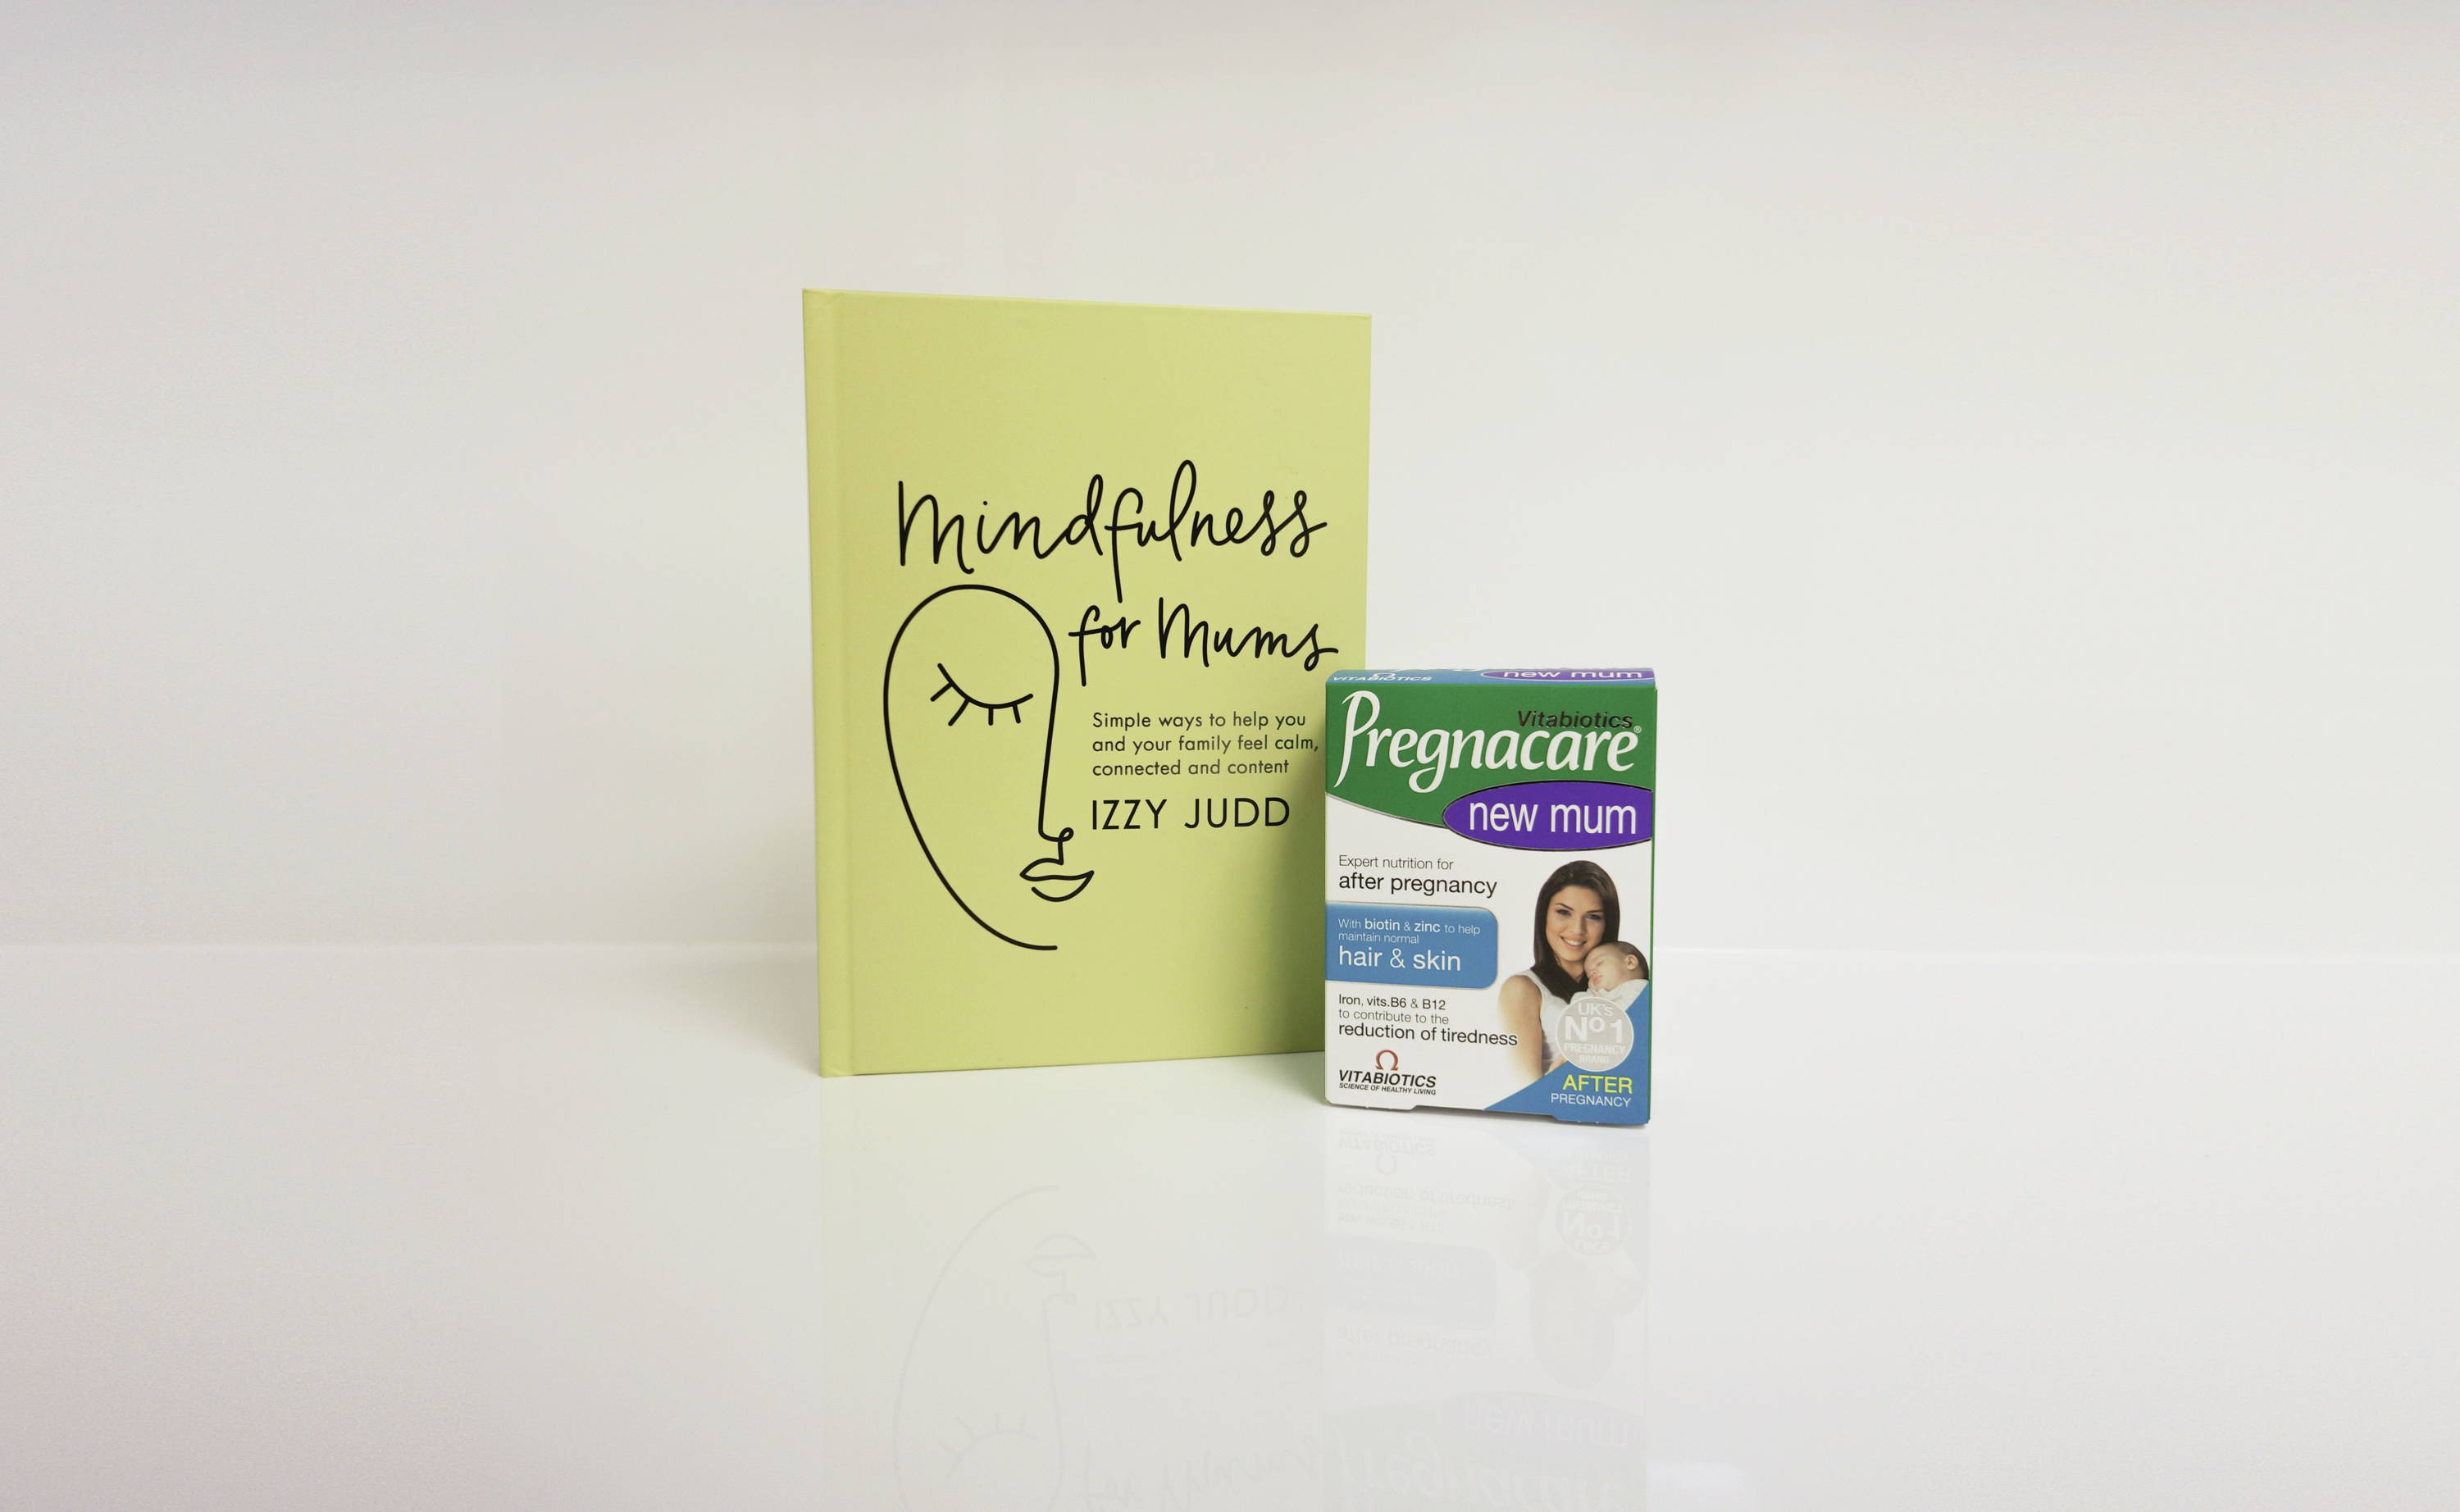 Book And Pregnacare Product On White Background